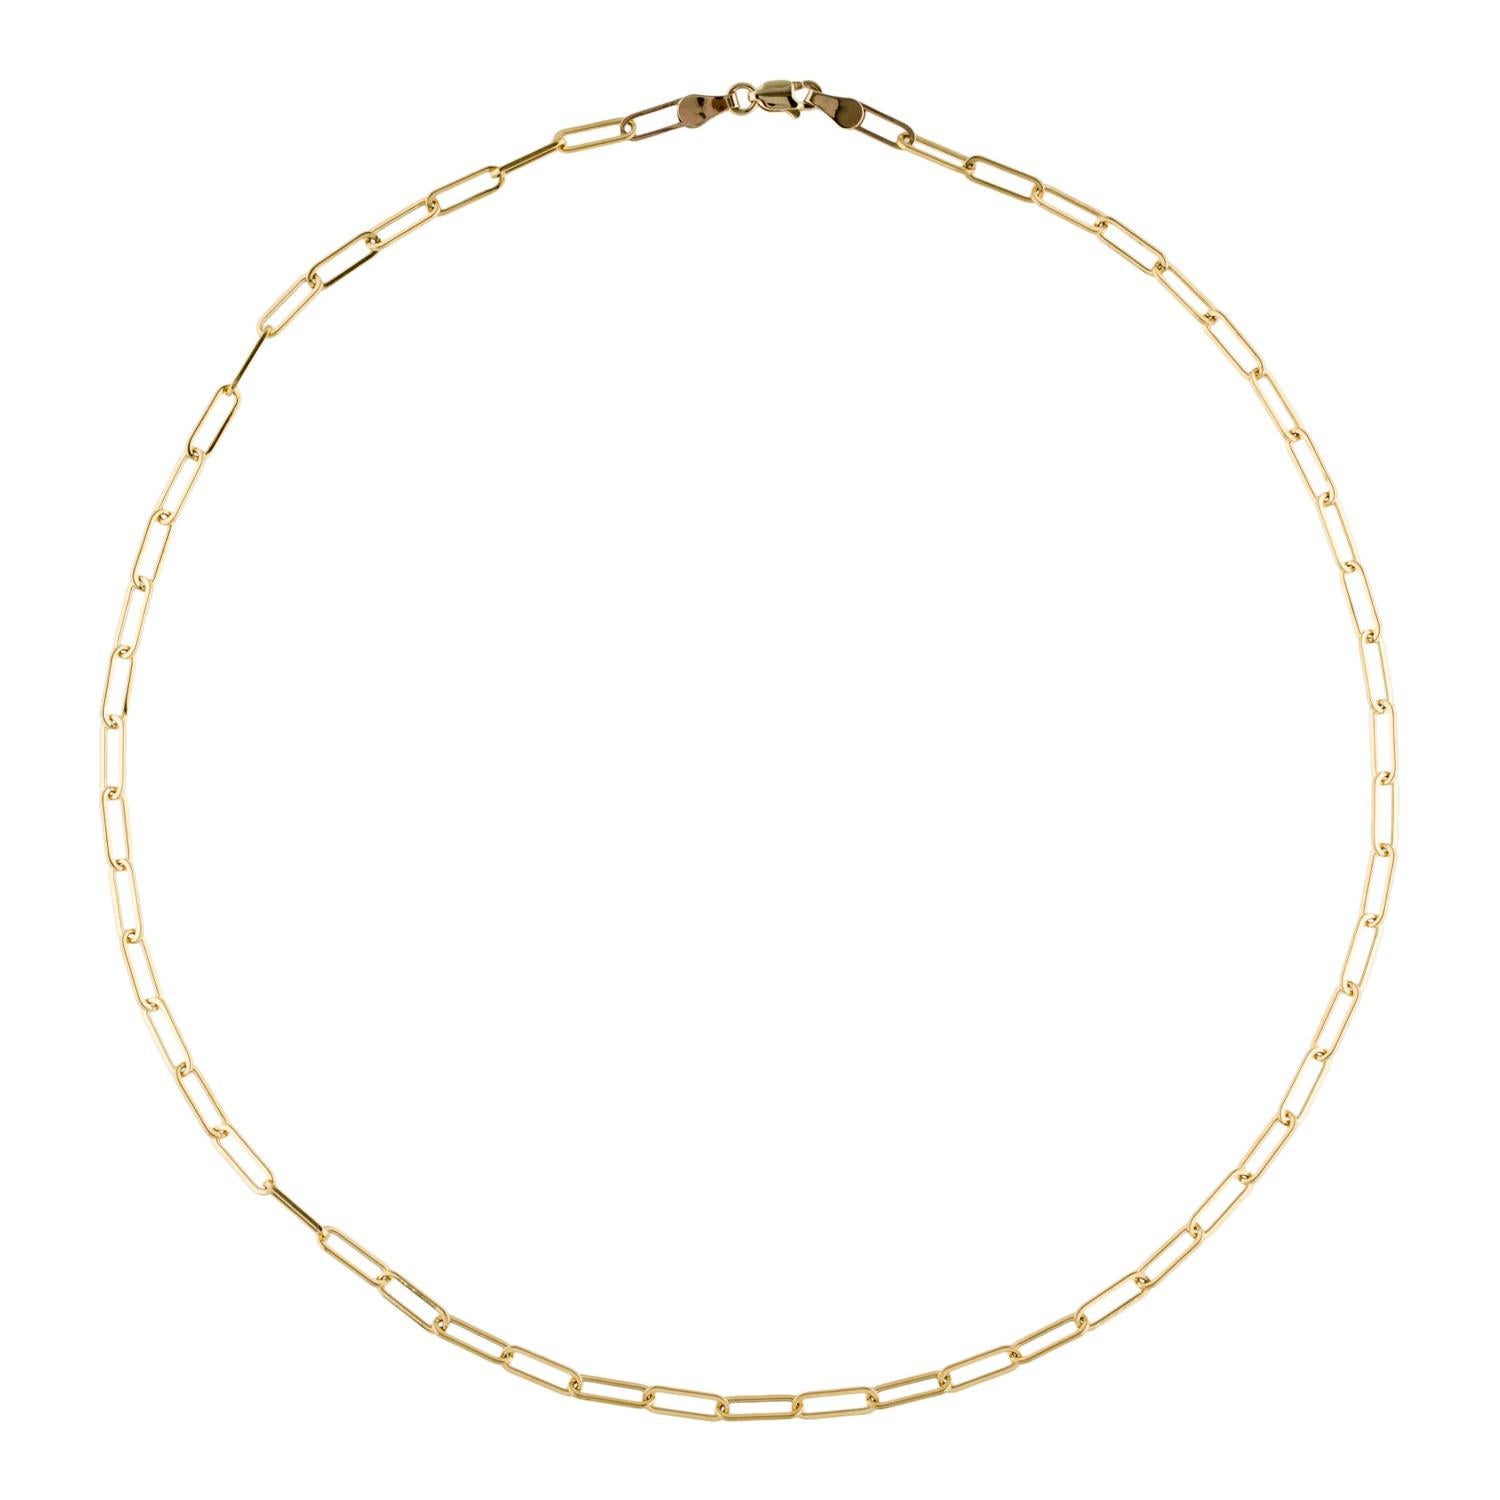 Joelle Chain necklaces are a classic staple in any person's jewelry box! This 14k gold Small Link chain comes with plenty of options, specifically your choice of length. Buy one and wear it as a simple standalone (with or without a pendant) or pick